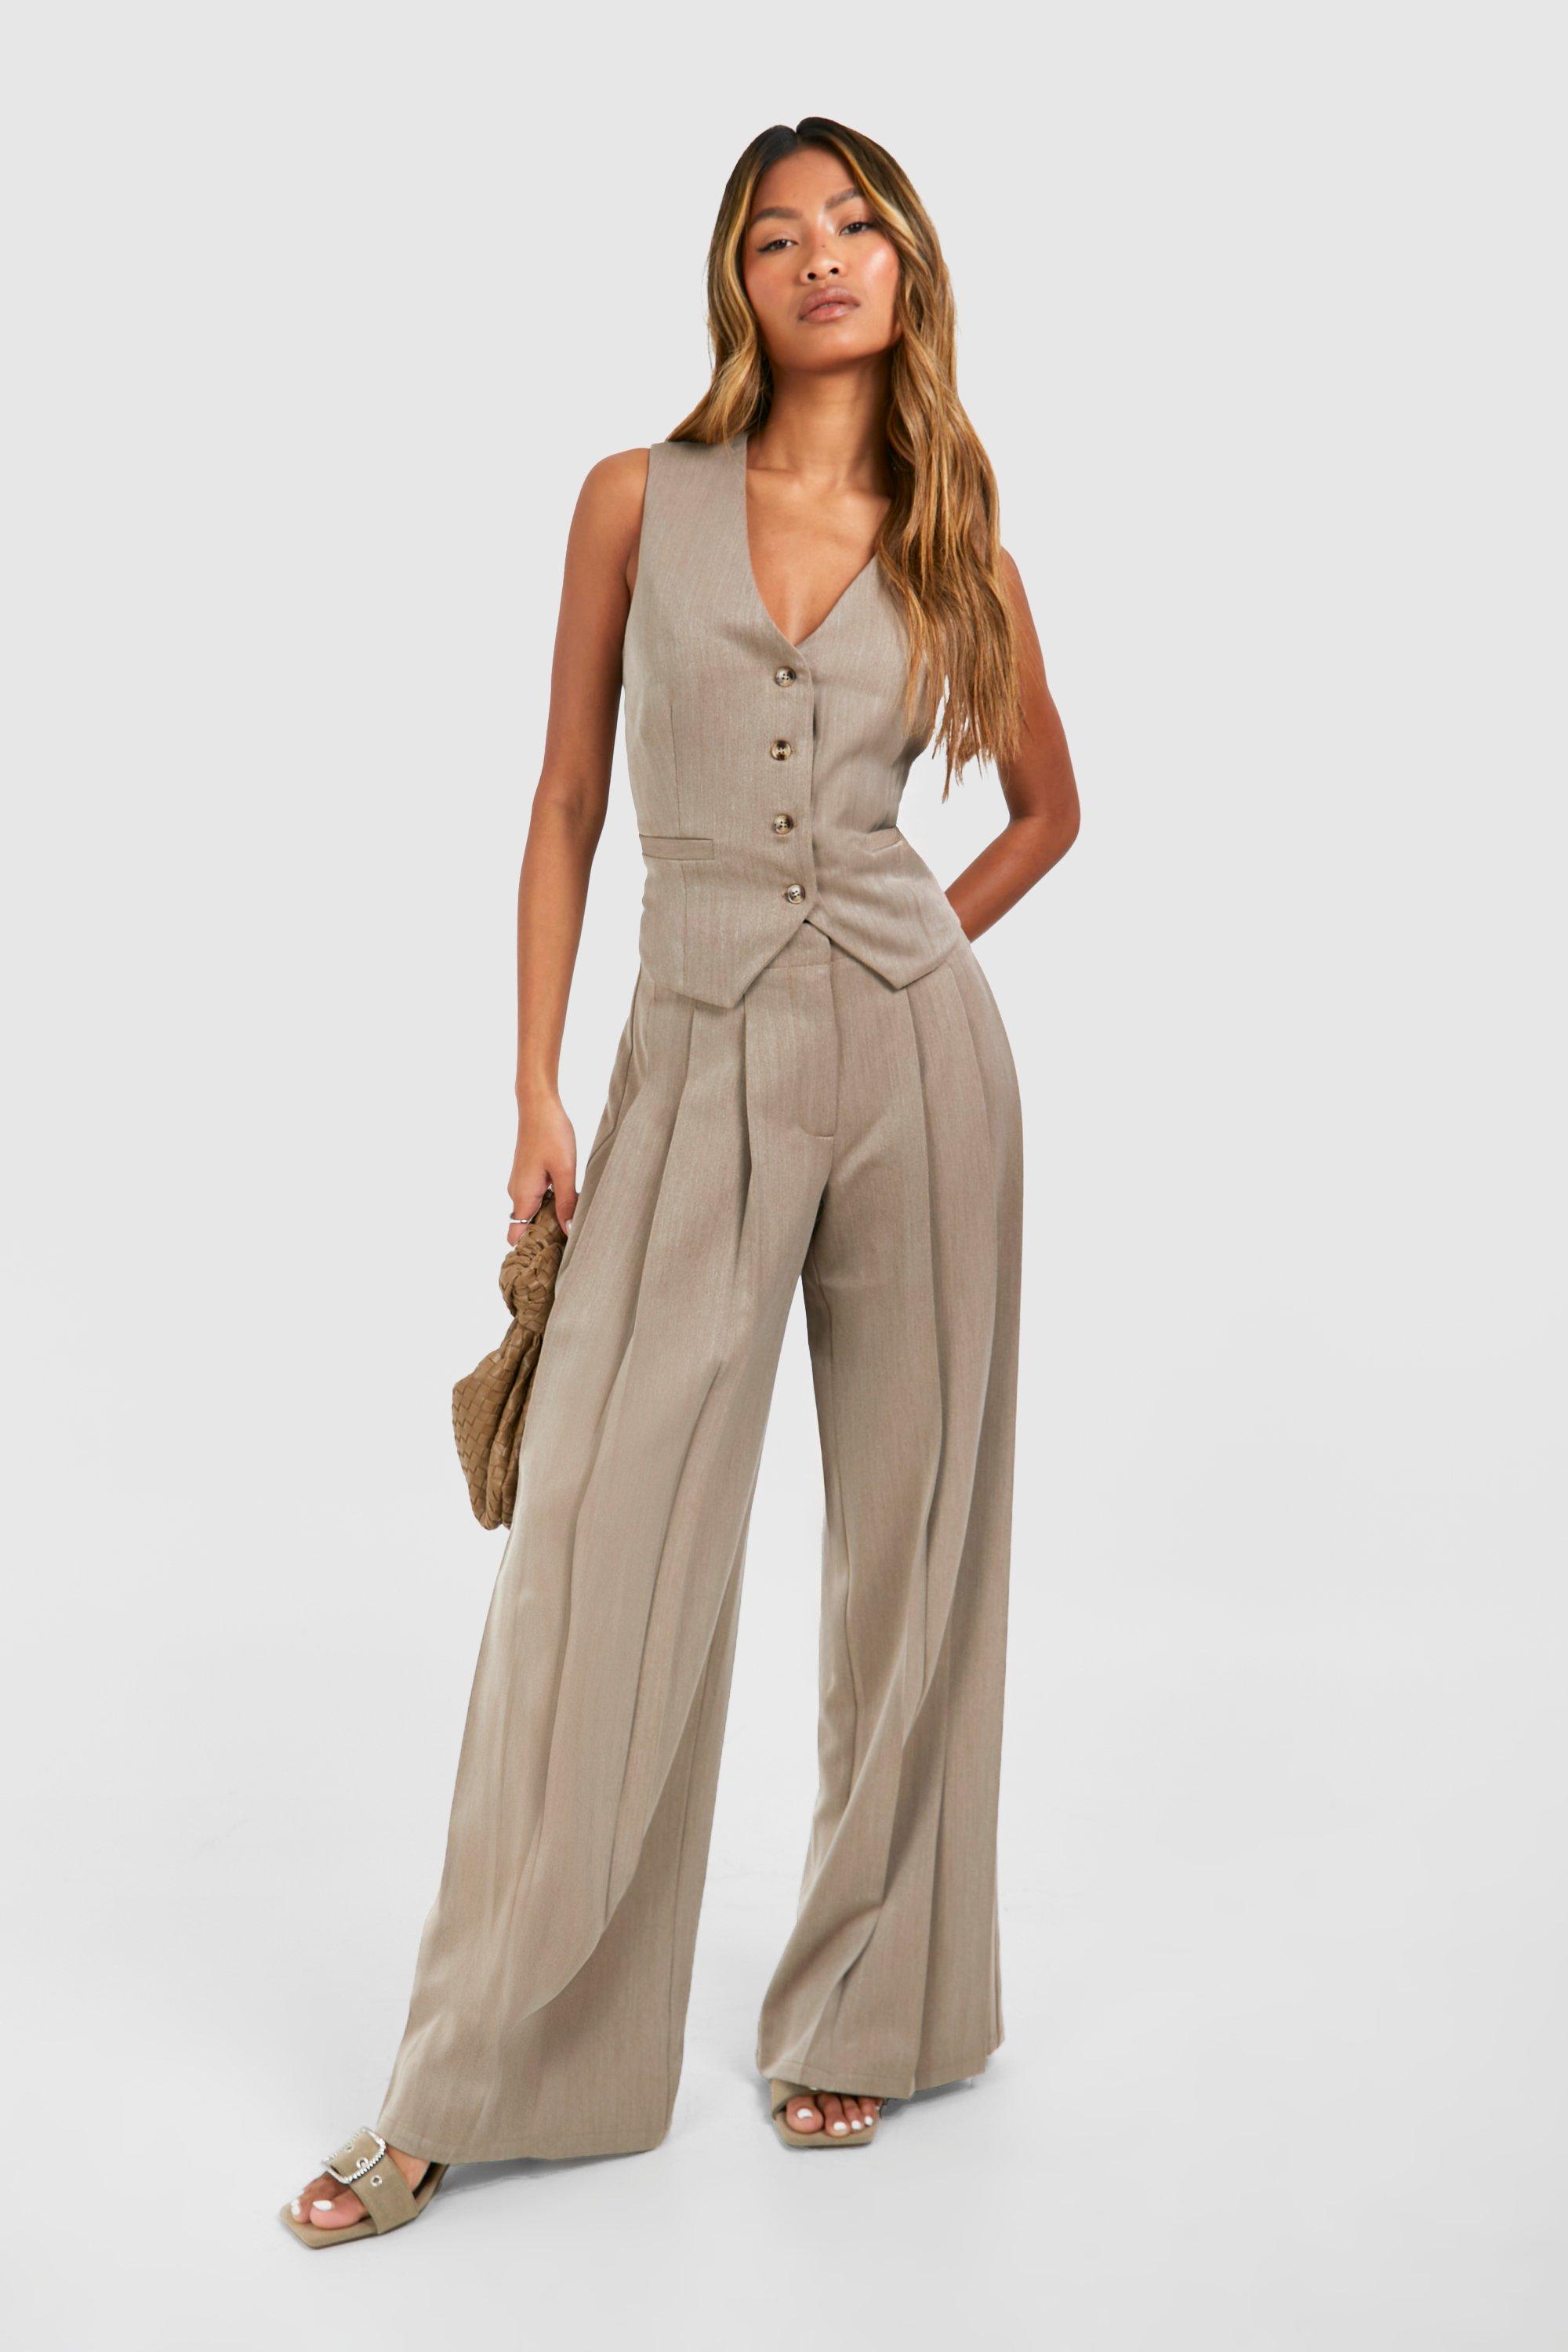 https://media.boohoo.com/i/boohoo/gzz77885_taupe_xl_2/female-taupe-linen-look-extreme-pleat-wide-leg-trousers